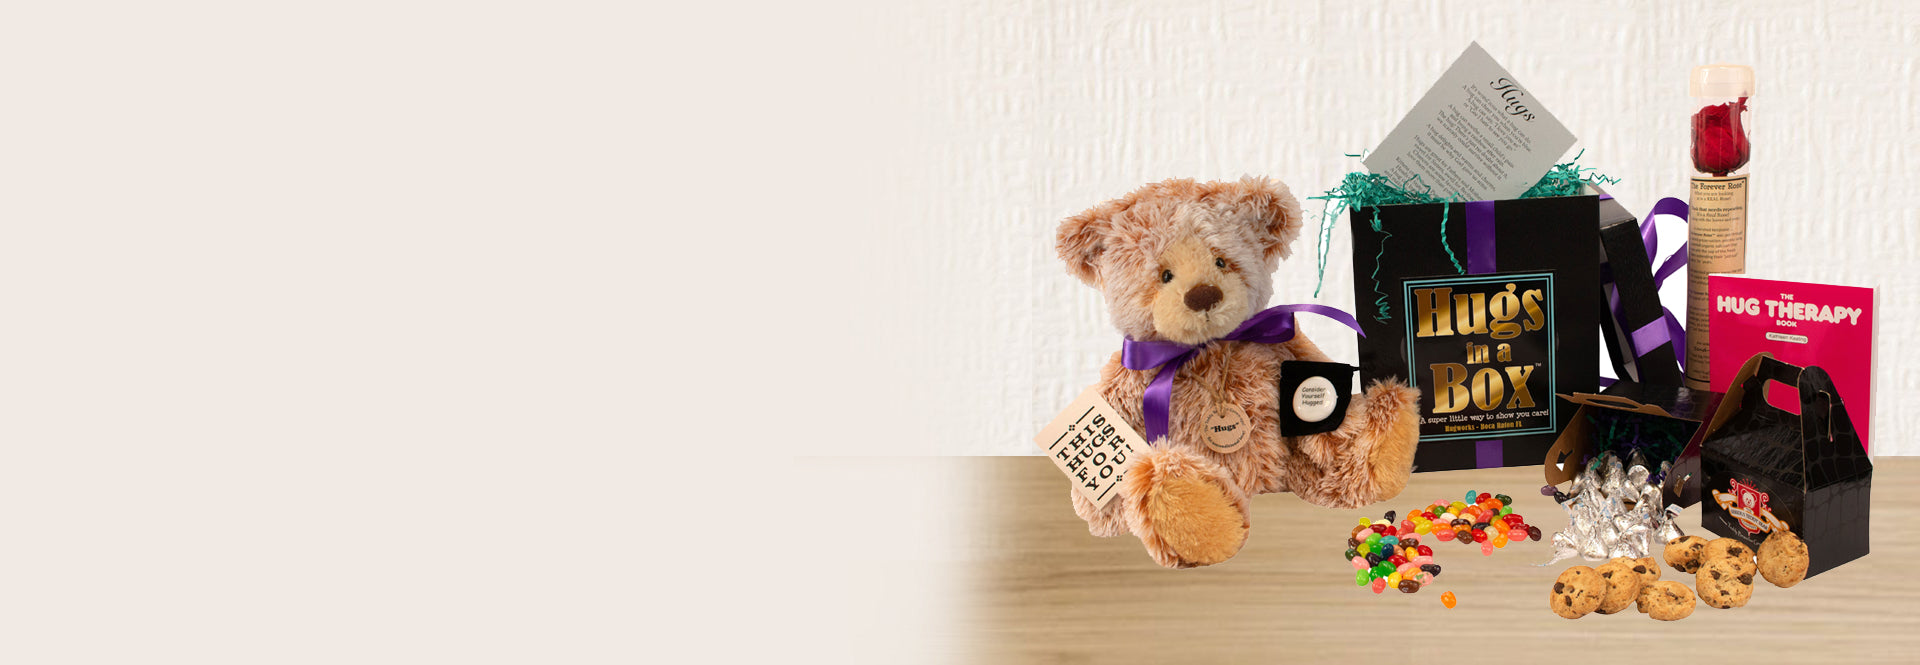 CURE Bears for Hope and Love